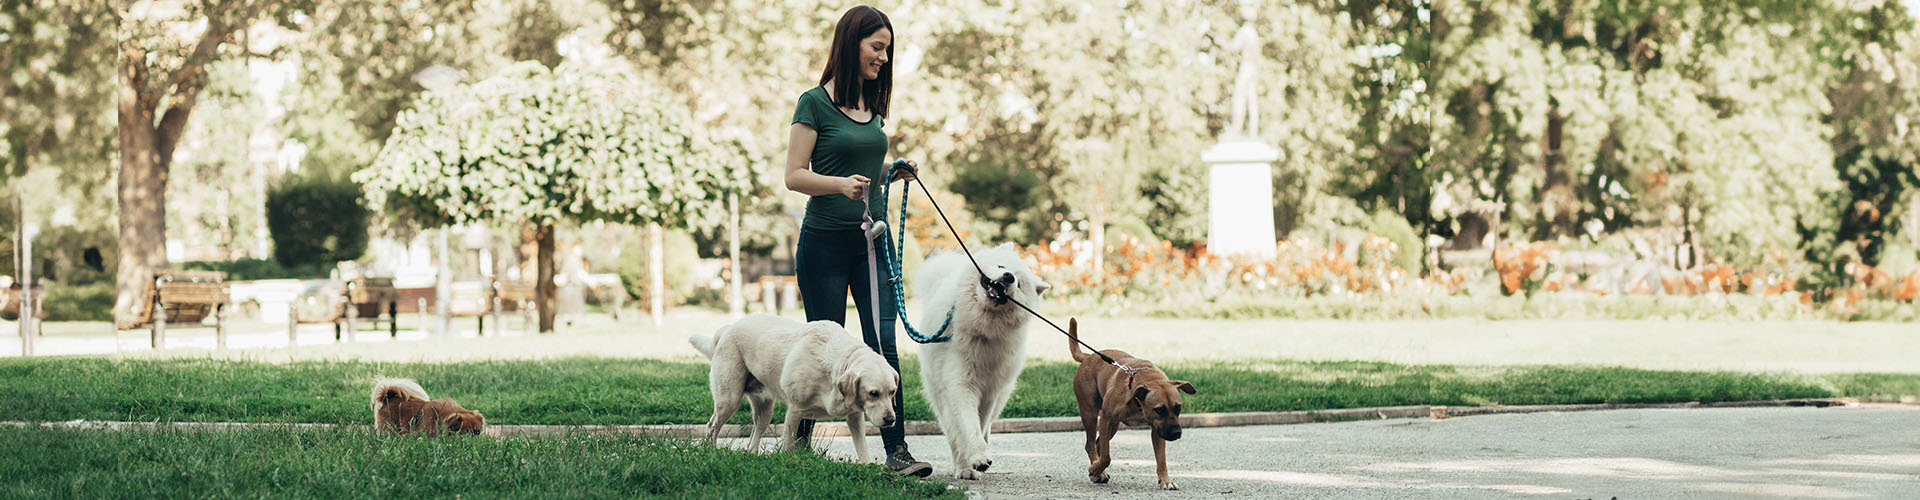 dog walker enjoying with dogs while walking outdoors